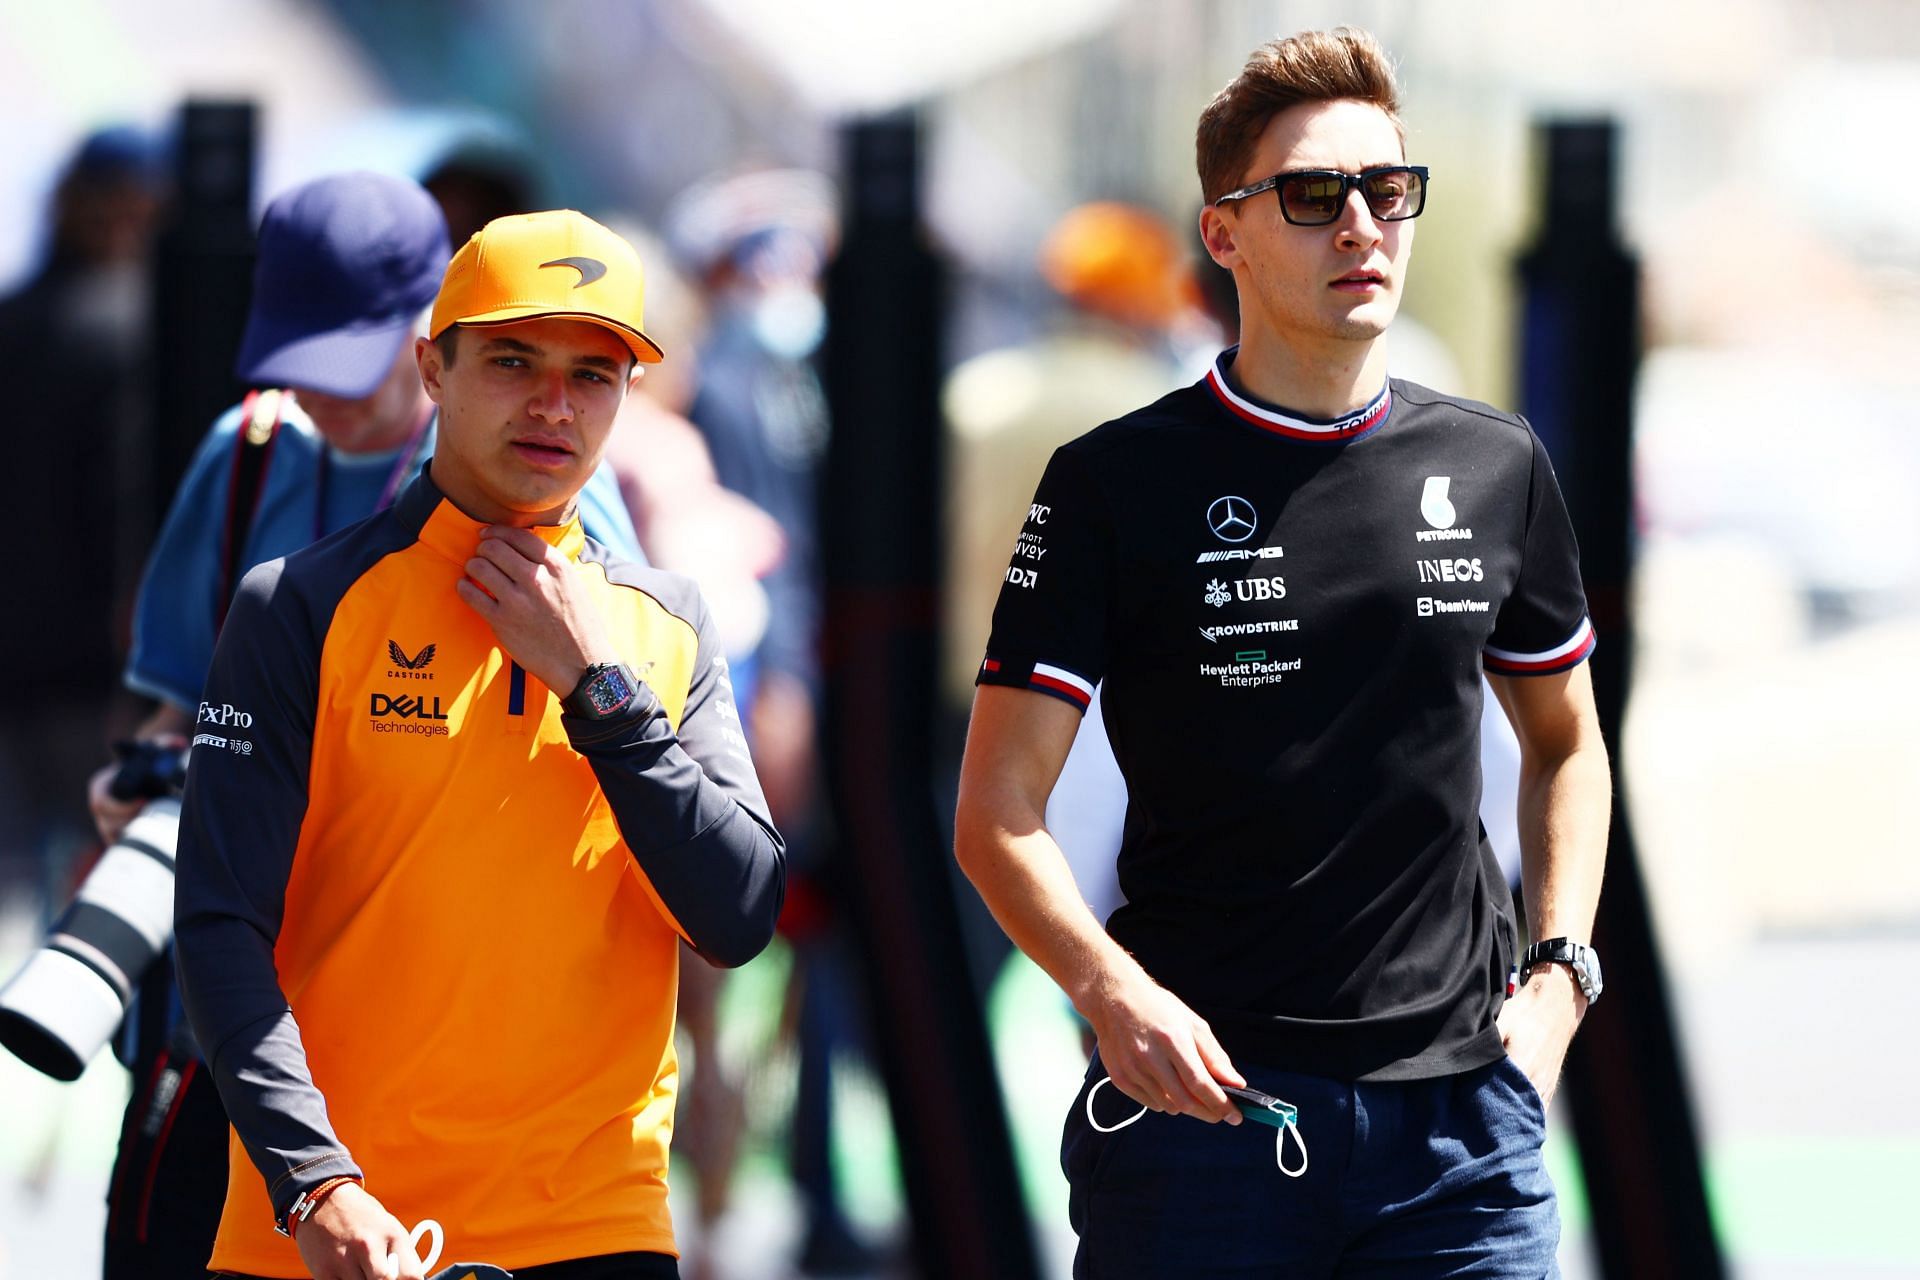 (L to R) McLaren driver Lando Norris and Mercedes driver George Russell seen here ahead of the 2022 F1 Saudi Arabian GP (Photo by Mark Thompson/Getty Images)